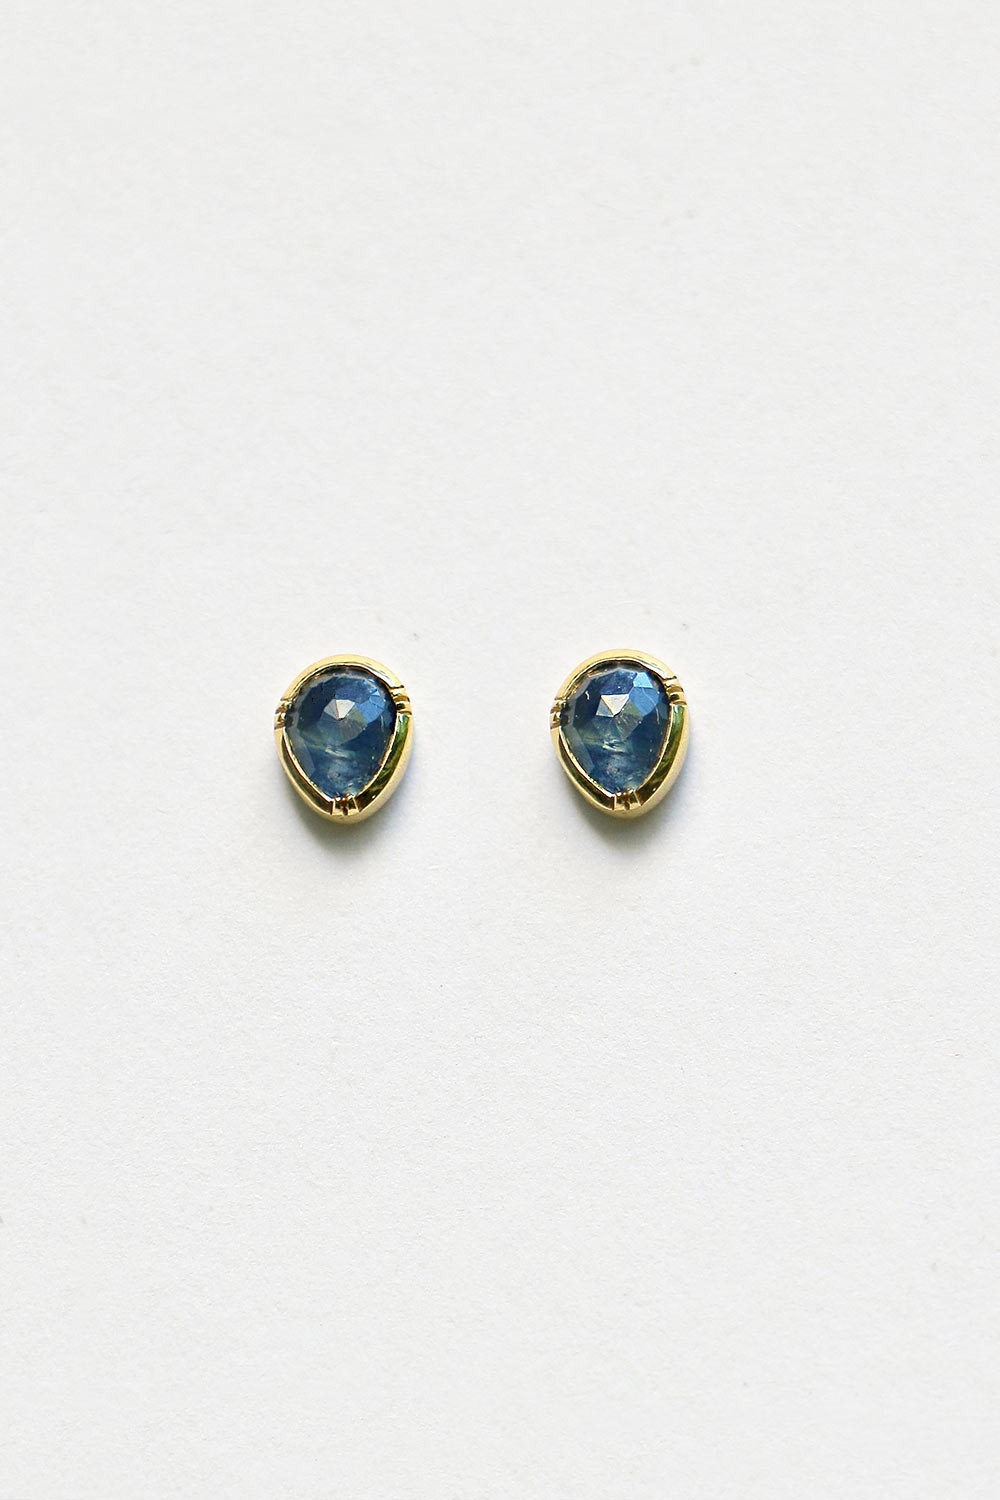 Blue sapphire studs by Brooke Gregson